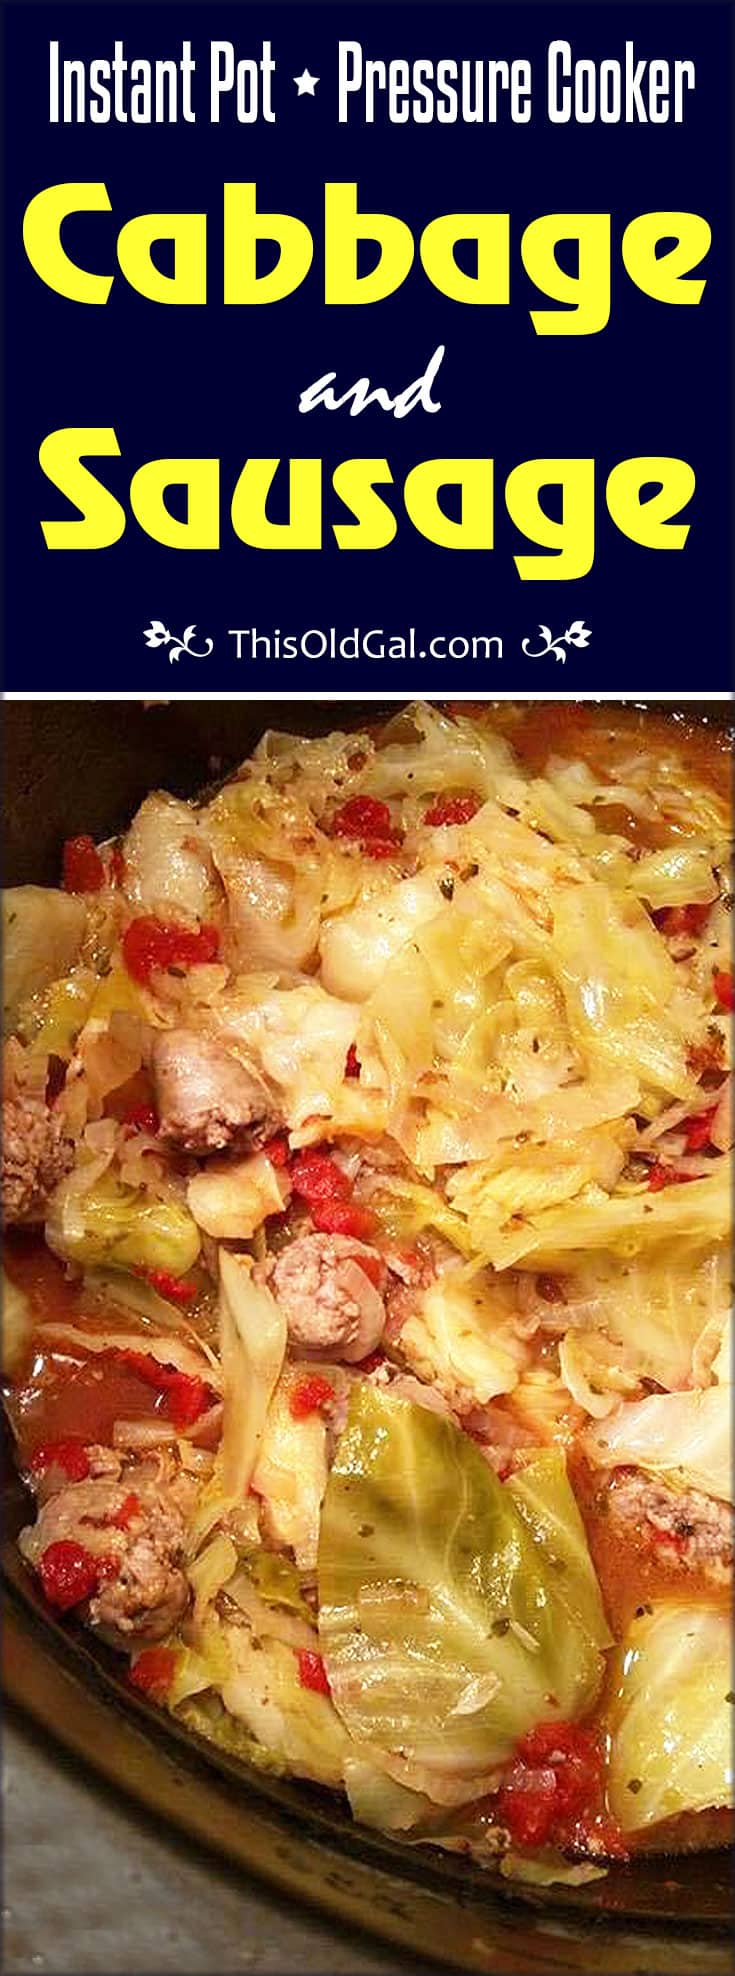 Pressure Cooker Cabbage and Sausage